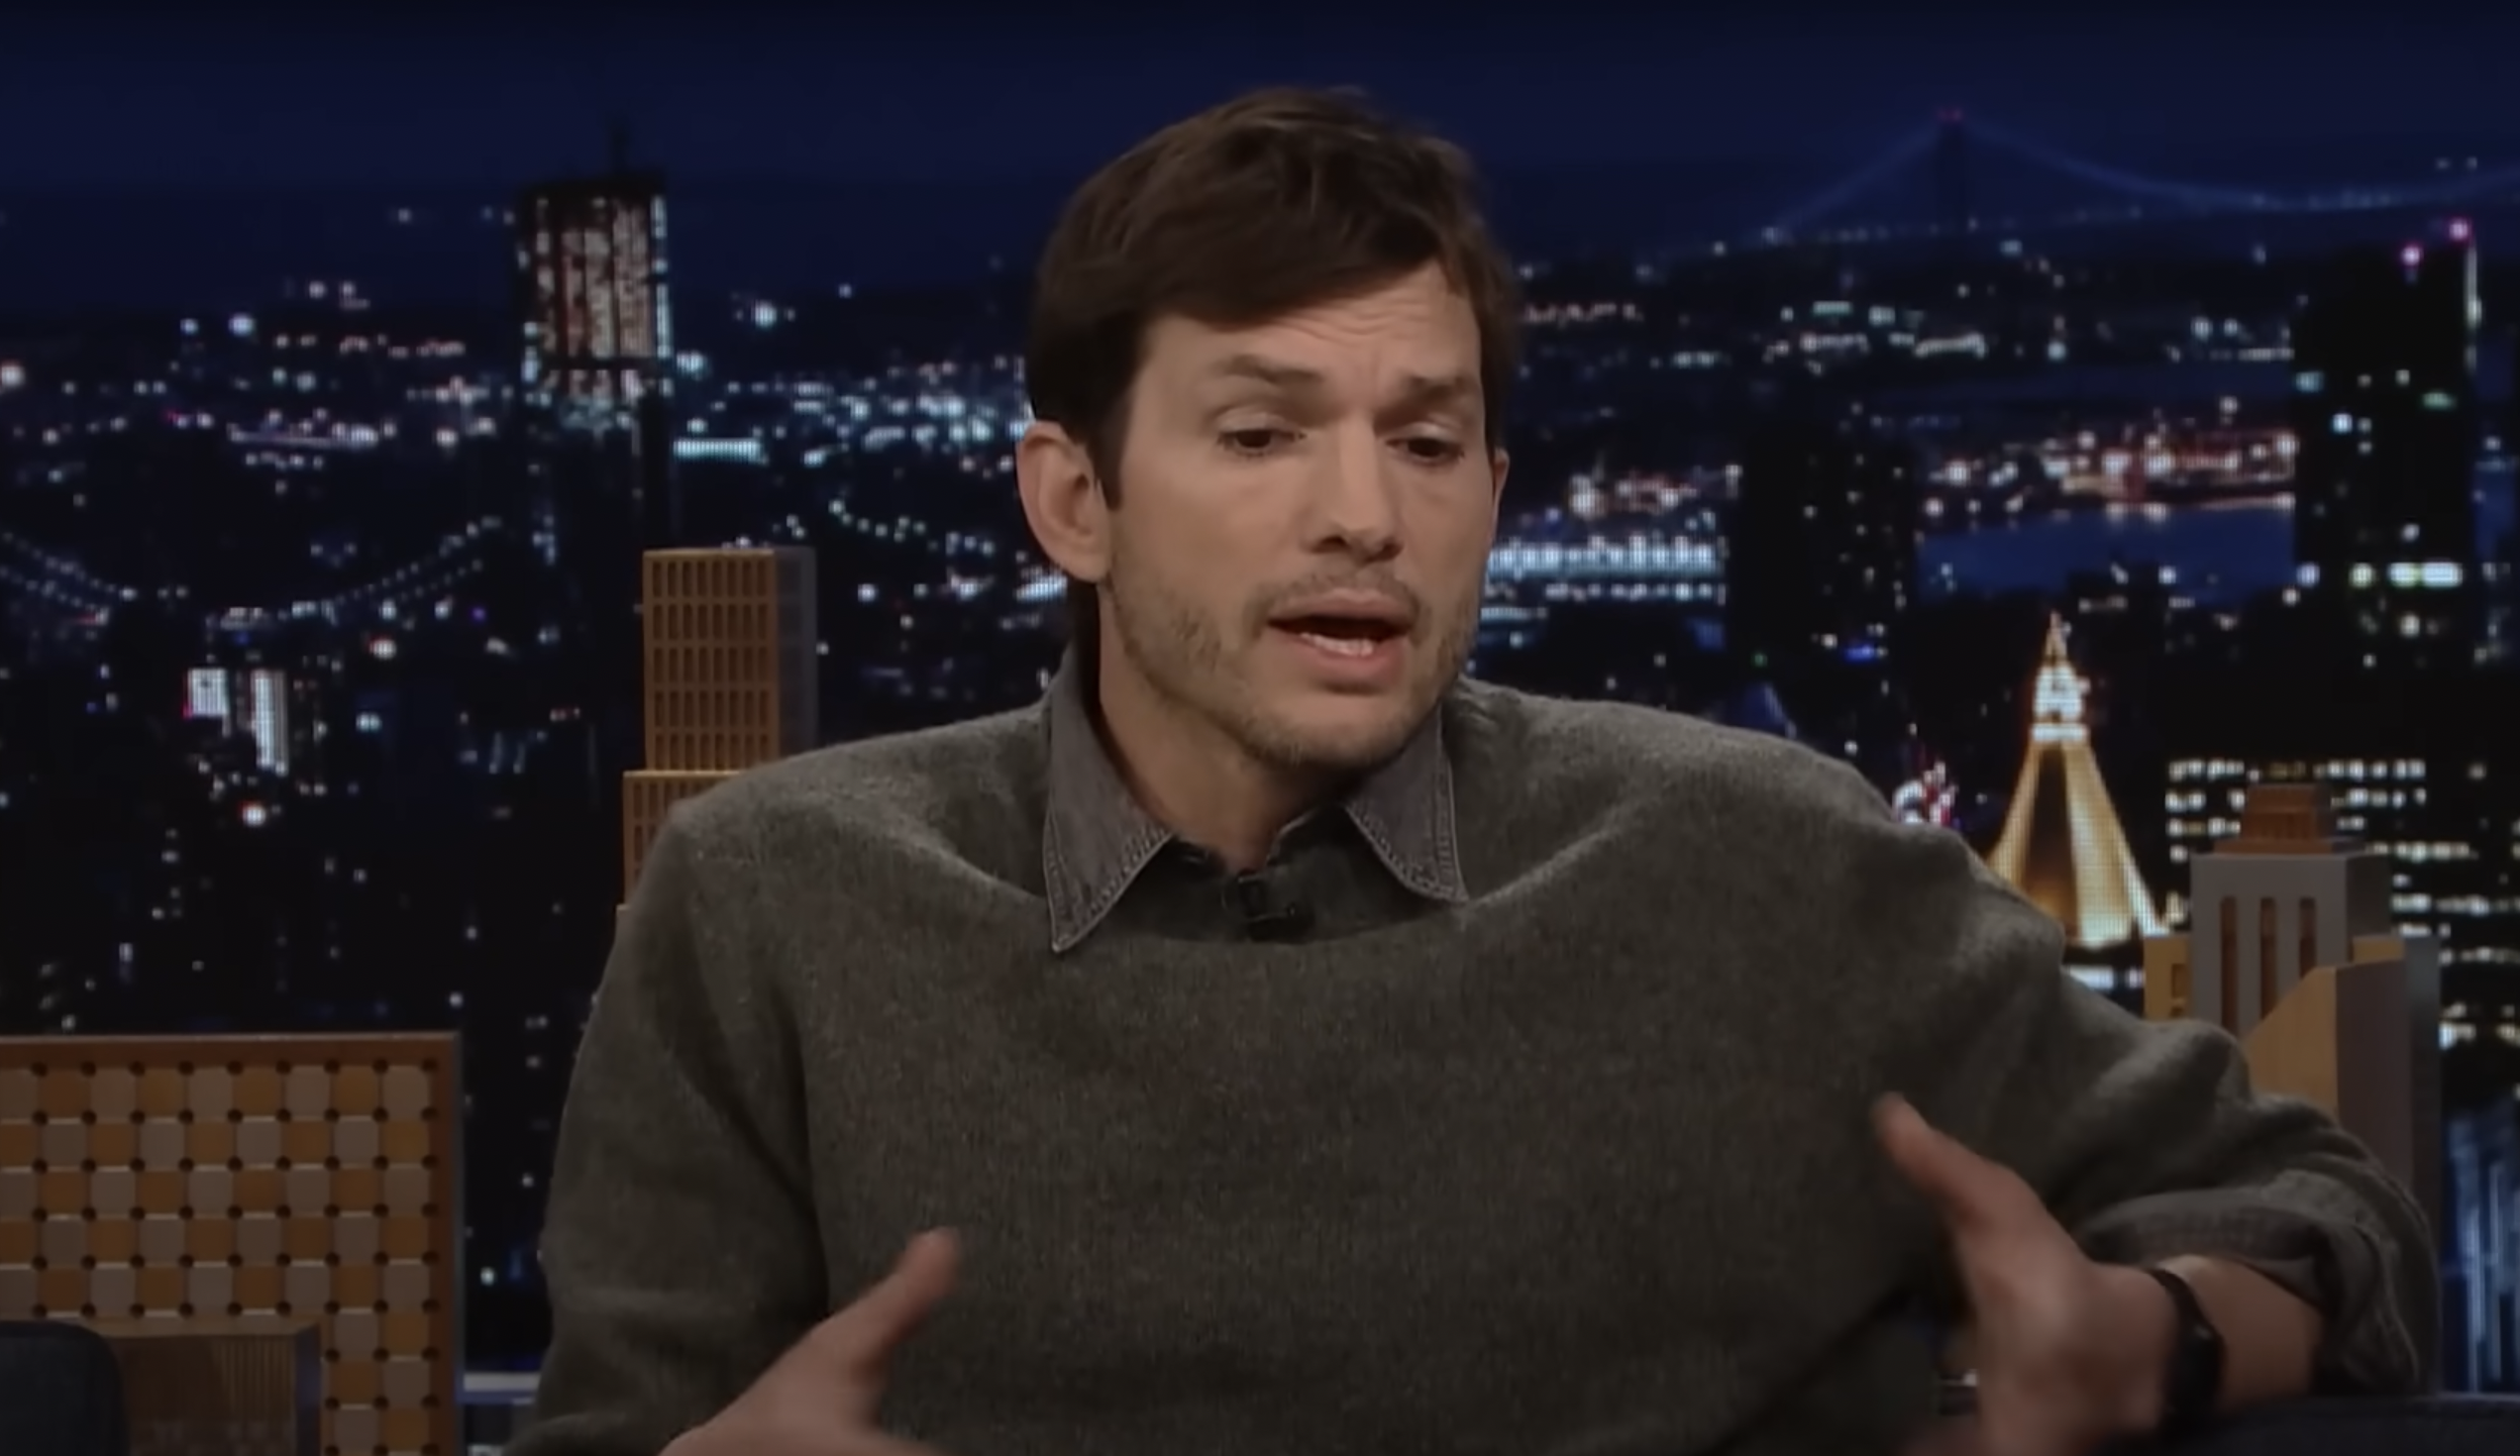 Ashton Kutcher And Mila Kunis Show Their Children To The World For The First Time